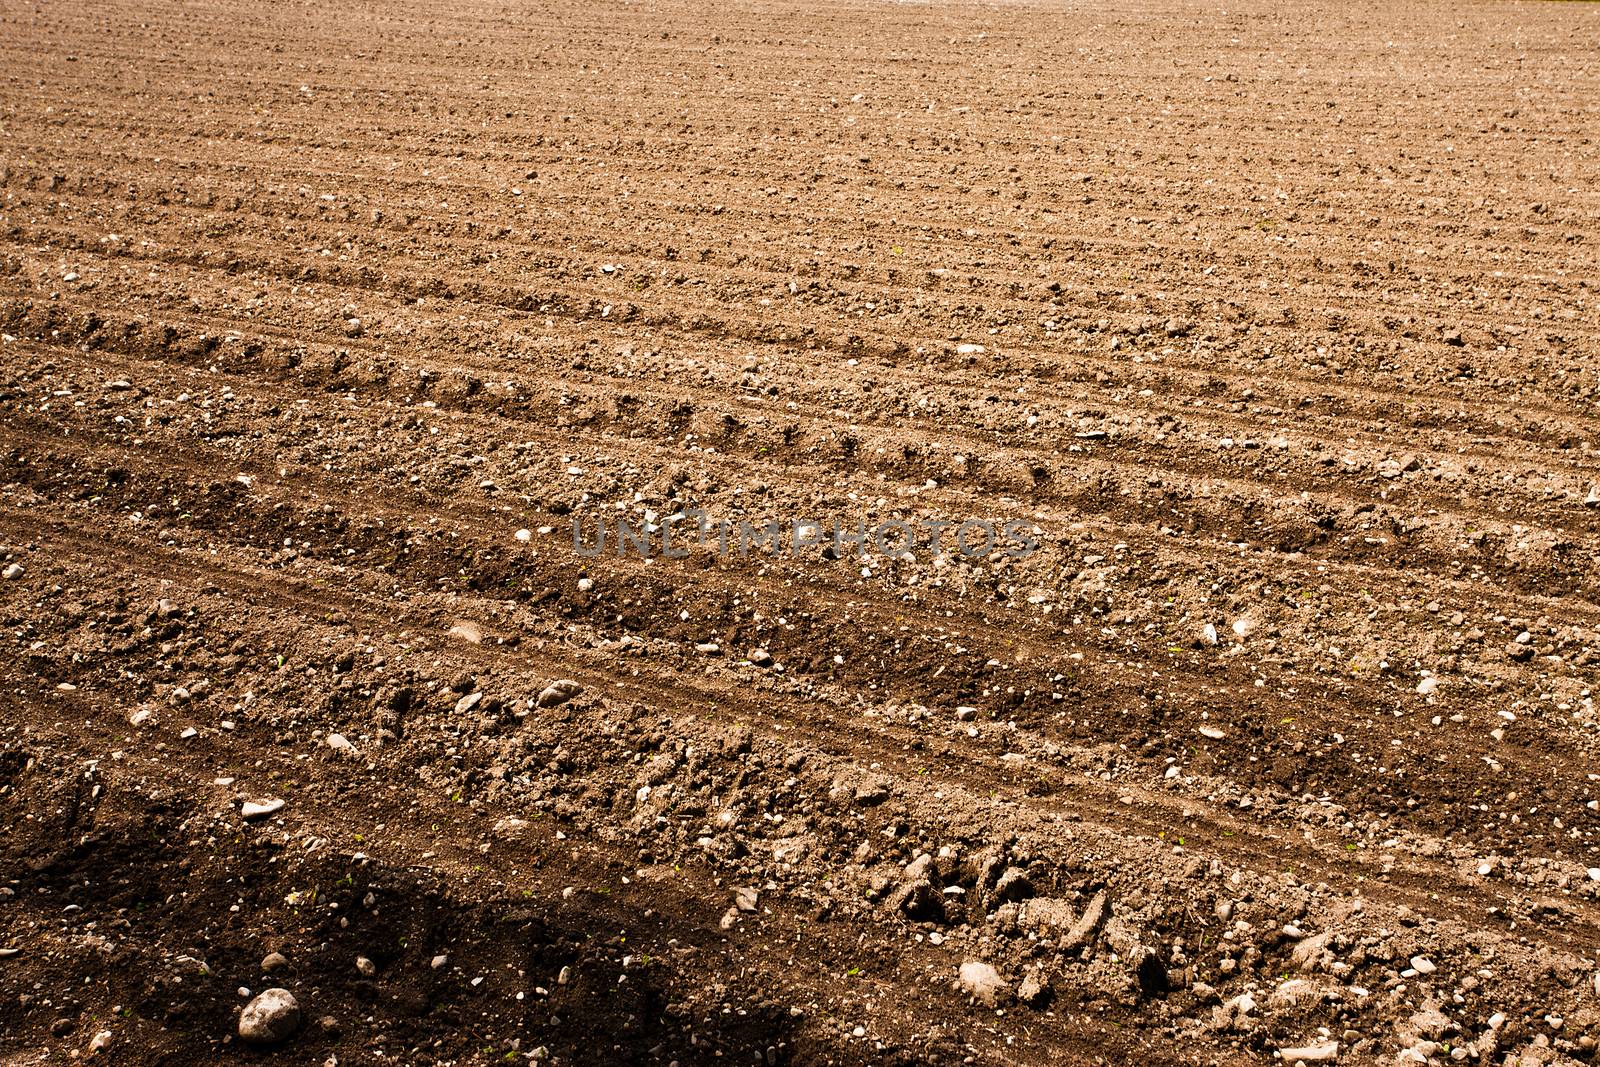 Freshly ploughed fertile field with furrows and rows.